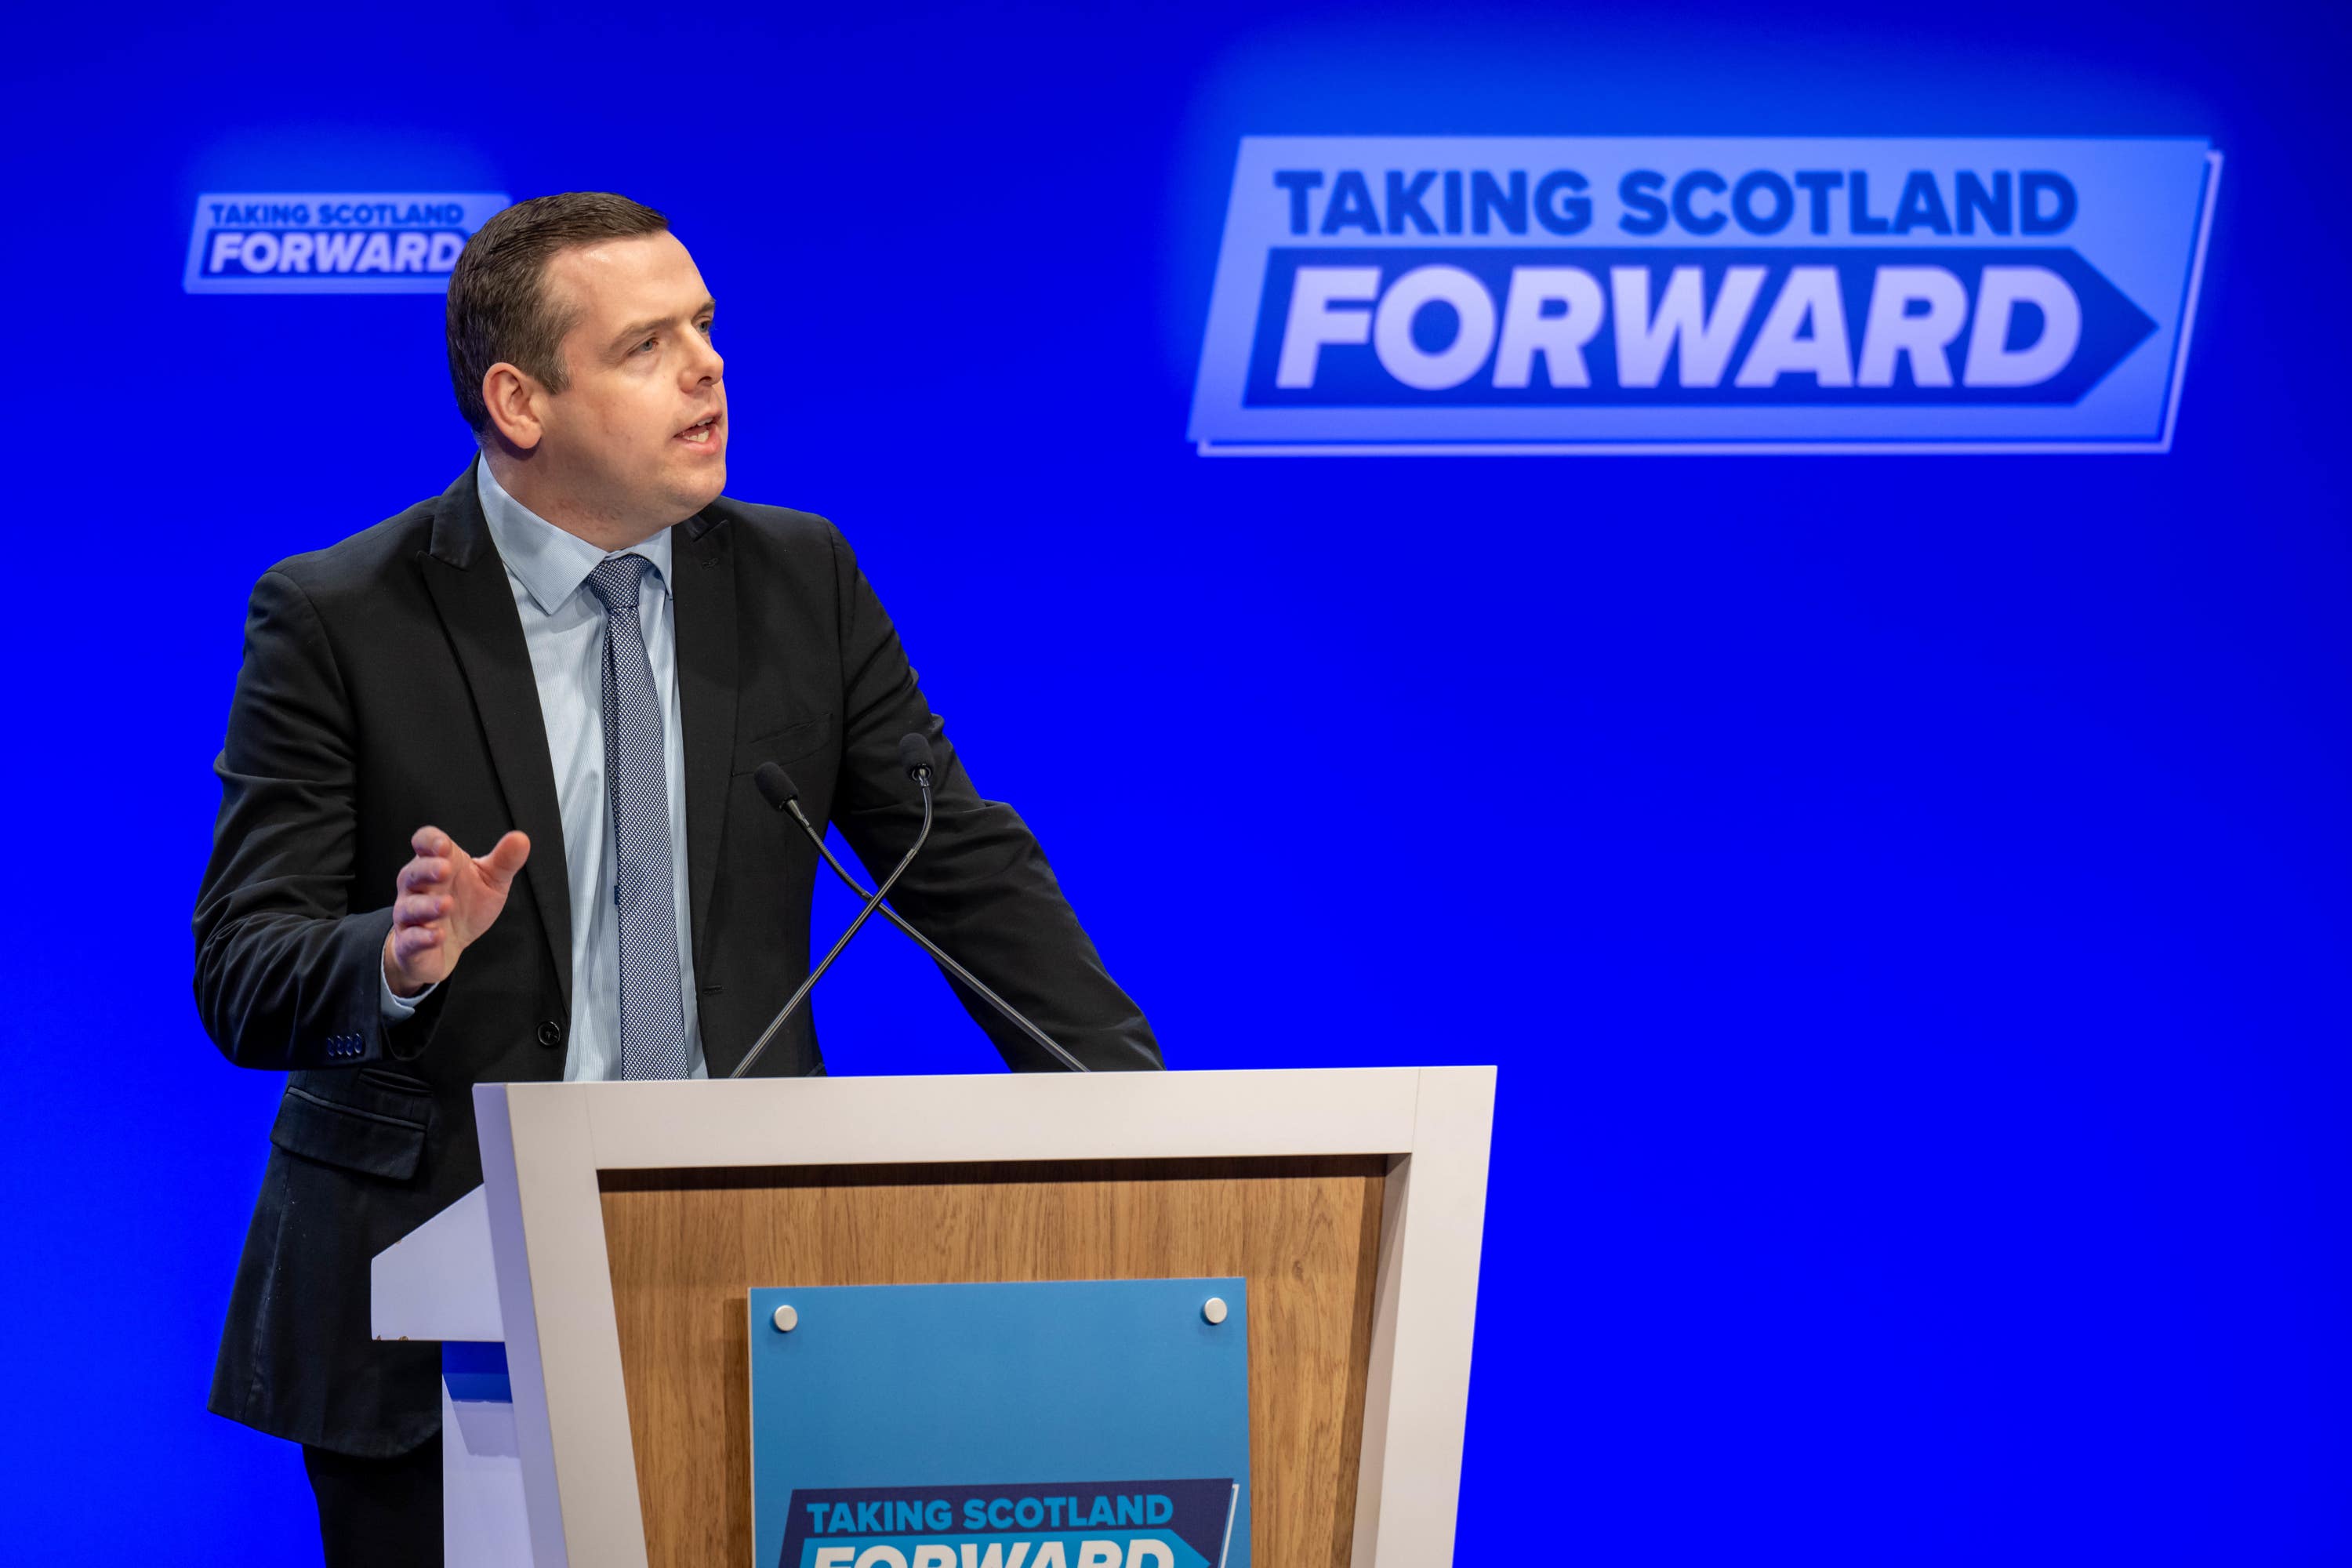 Scottish Conservative leader Douglas Ross appealed to the ‘pro-UK, anti-SNP majority’ in the country to back his party.